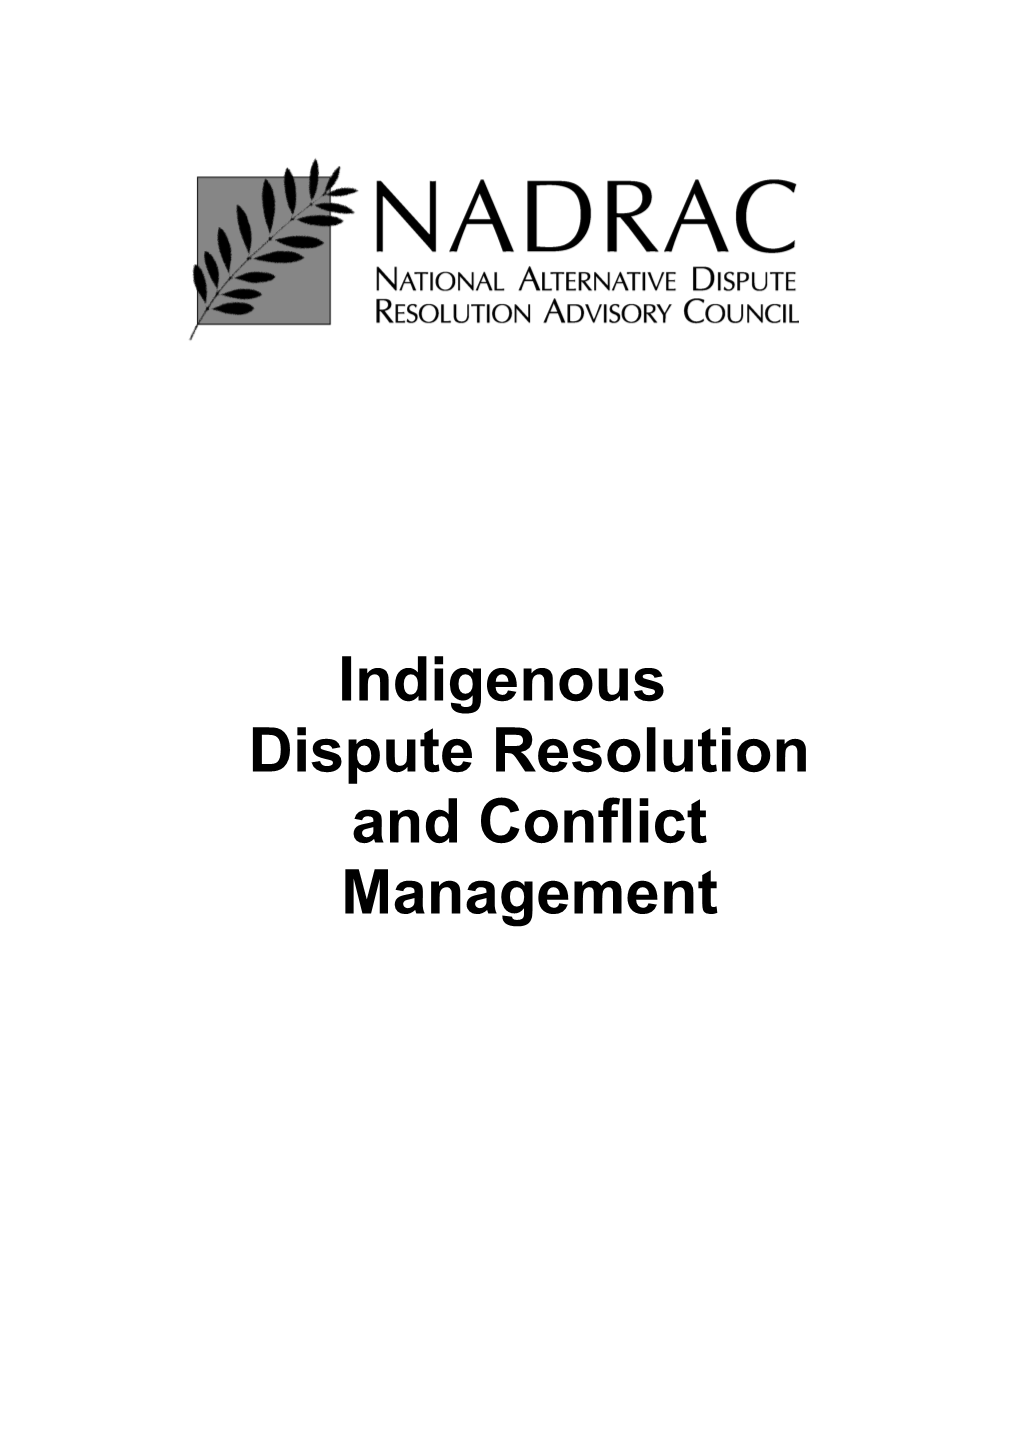 Indigenous Dispute Resolution and Conflict Management